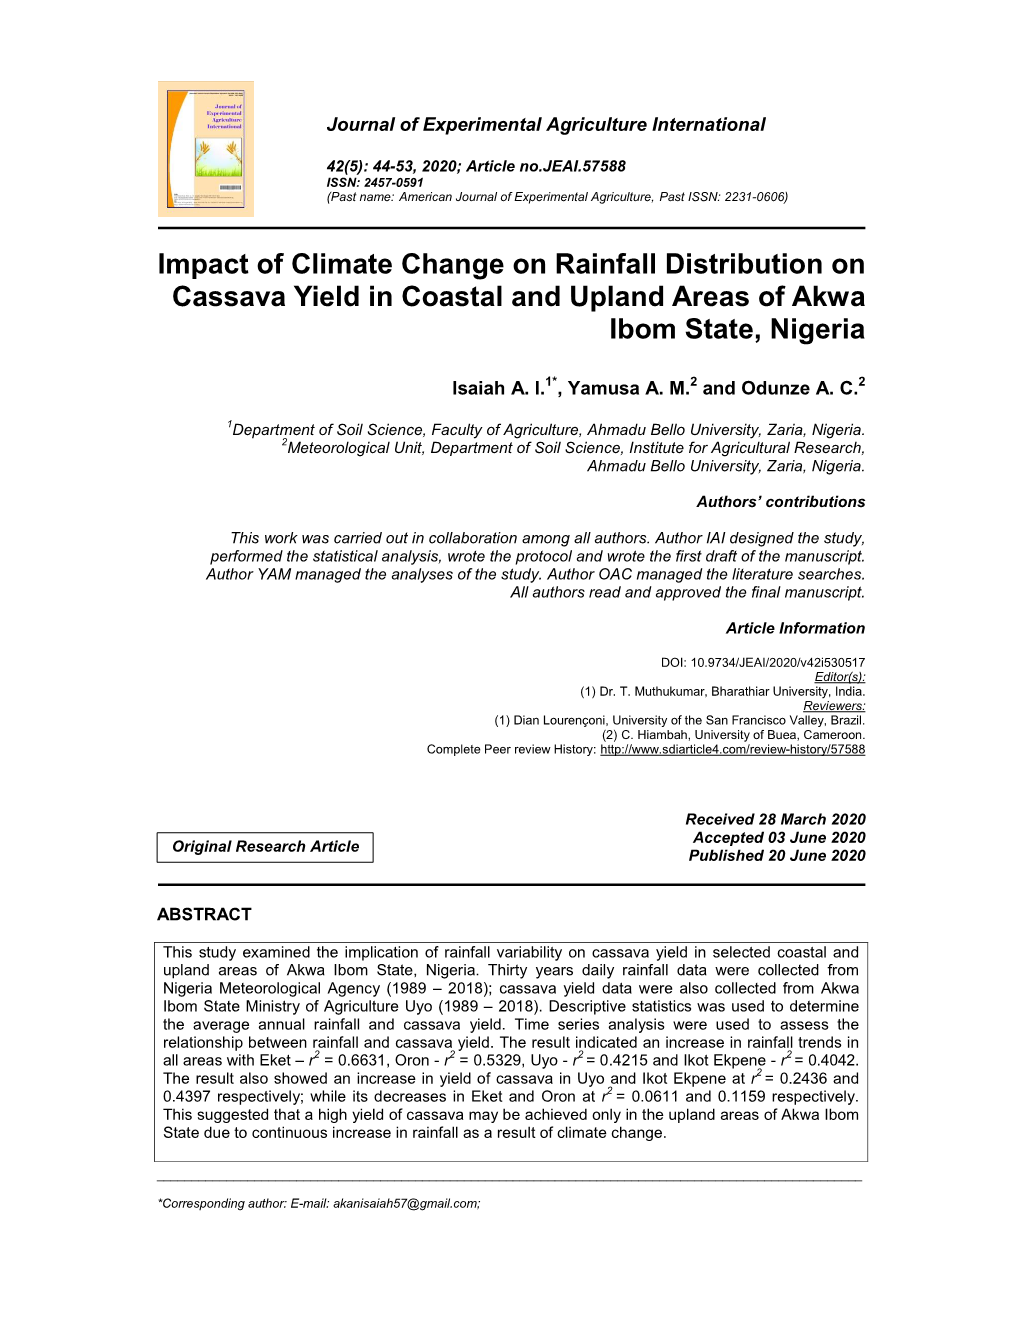 Impact of Climate Change on Rainfall Distribution on Cassava Yield in Coastal and Upland Areas of Akwa Ibom State, Nigeria